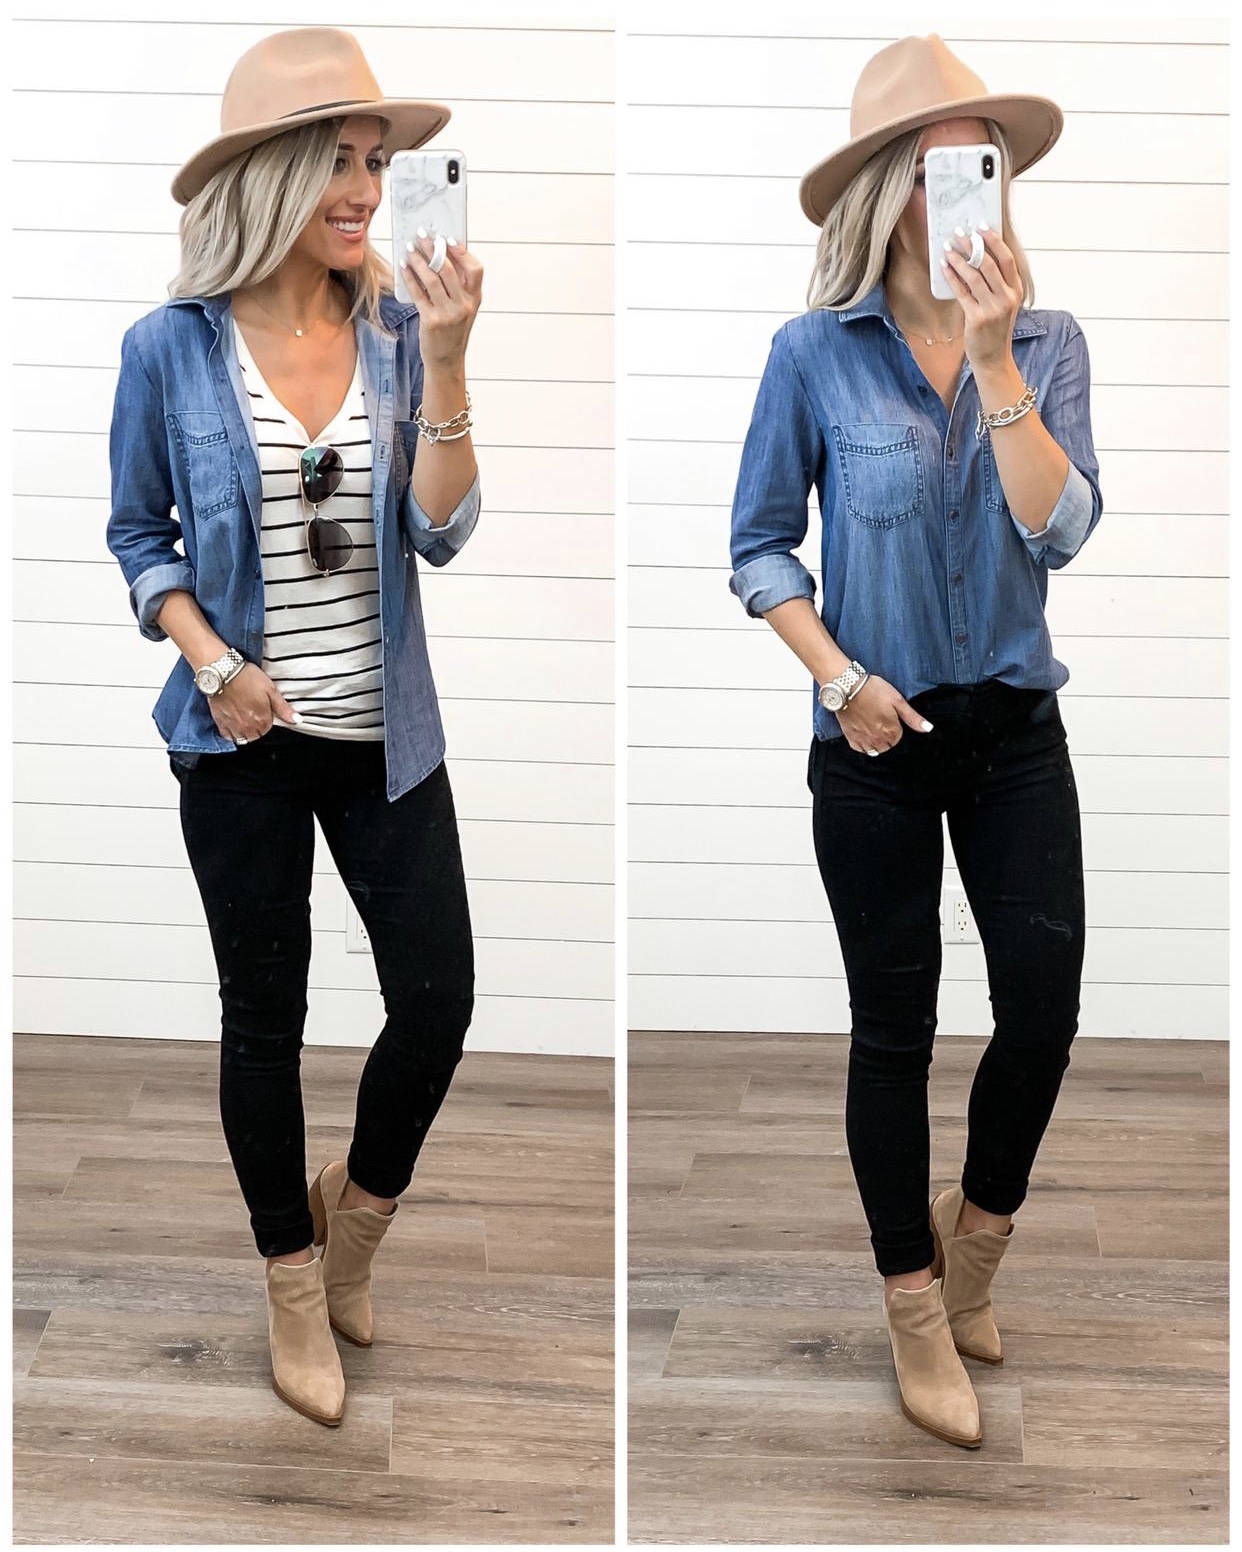 nordstrom anniversary sale nsale 2019 fall basics summer to fall transition casual outfits Laura Beverlin 19